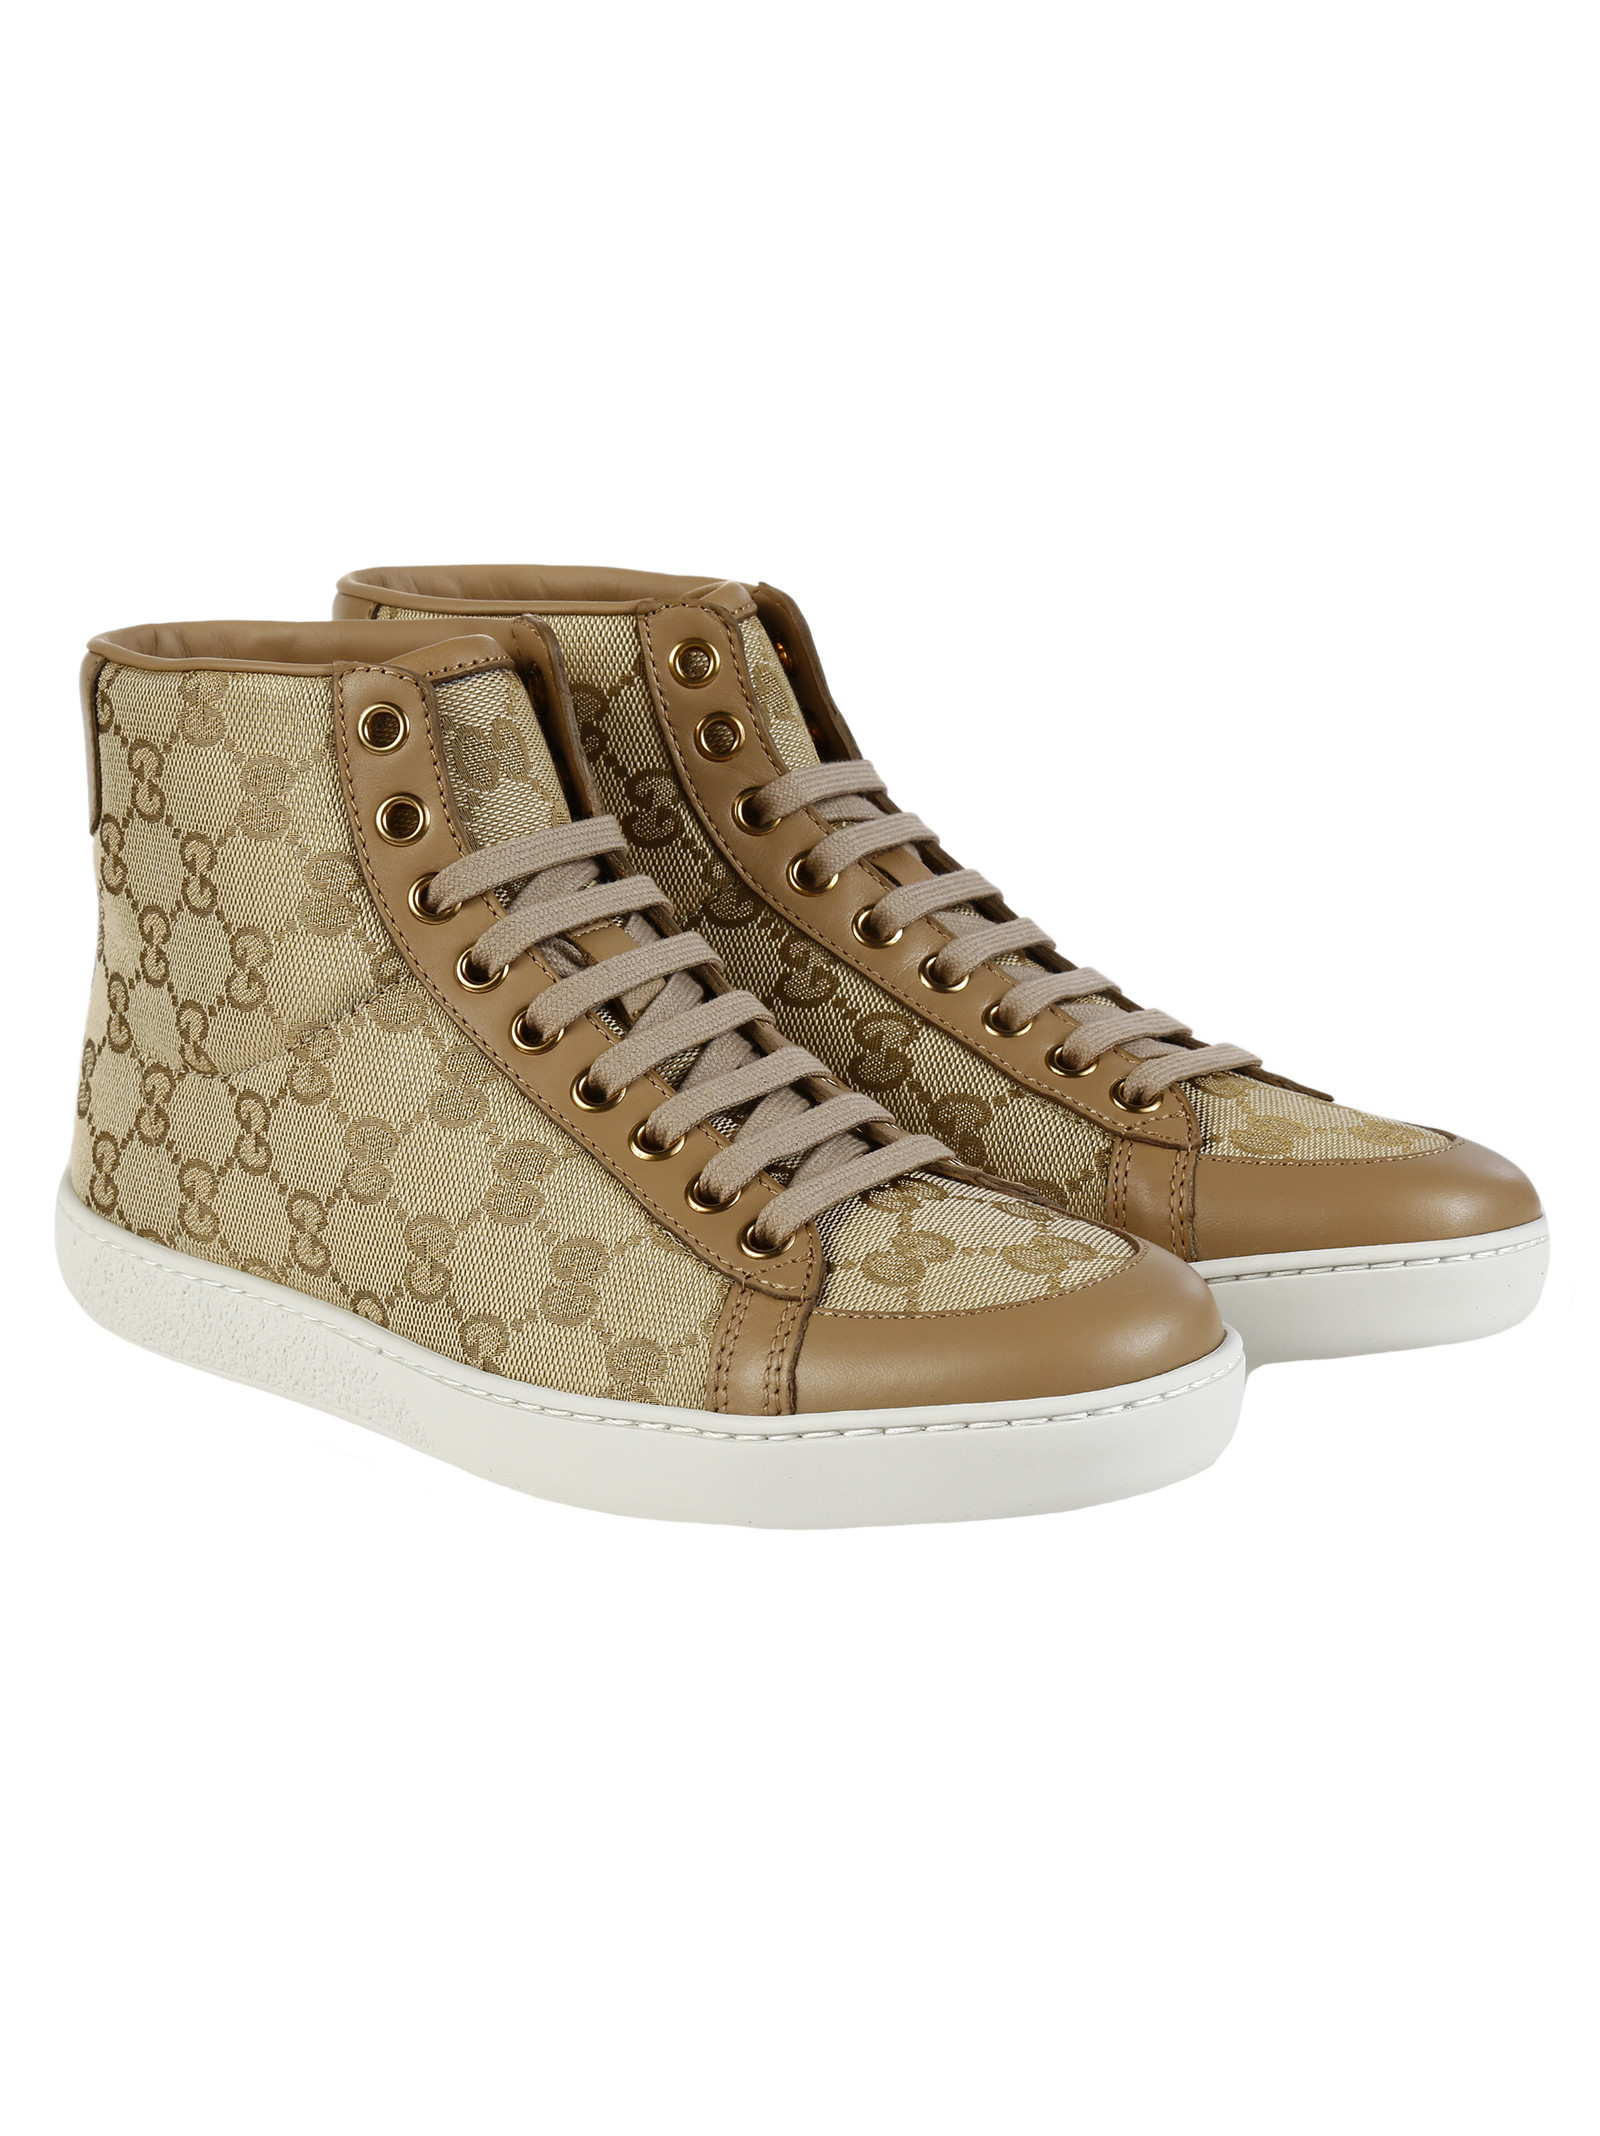 Gucci Original Gg Canvas Brooklyn High Top Sneakers in Beige (New sand ...